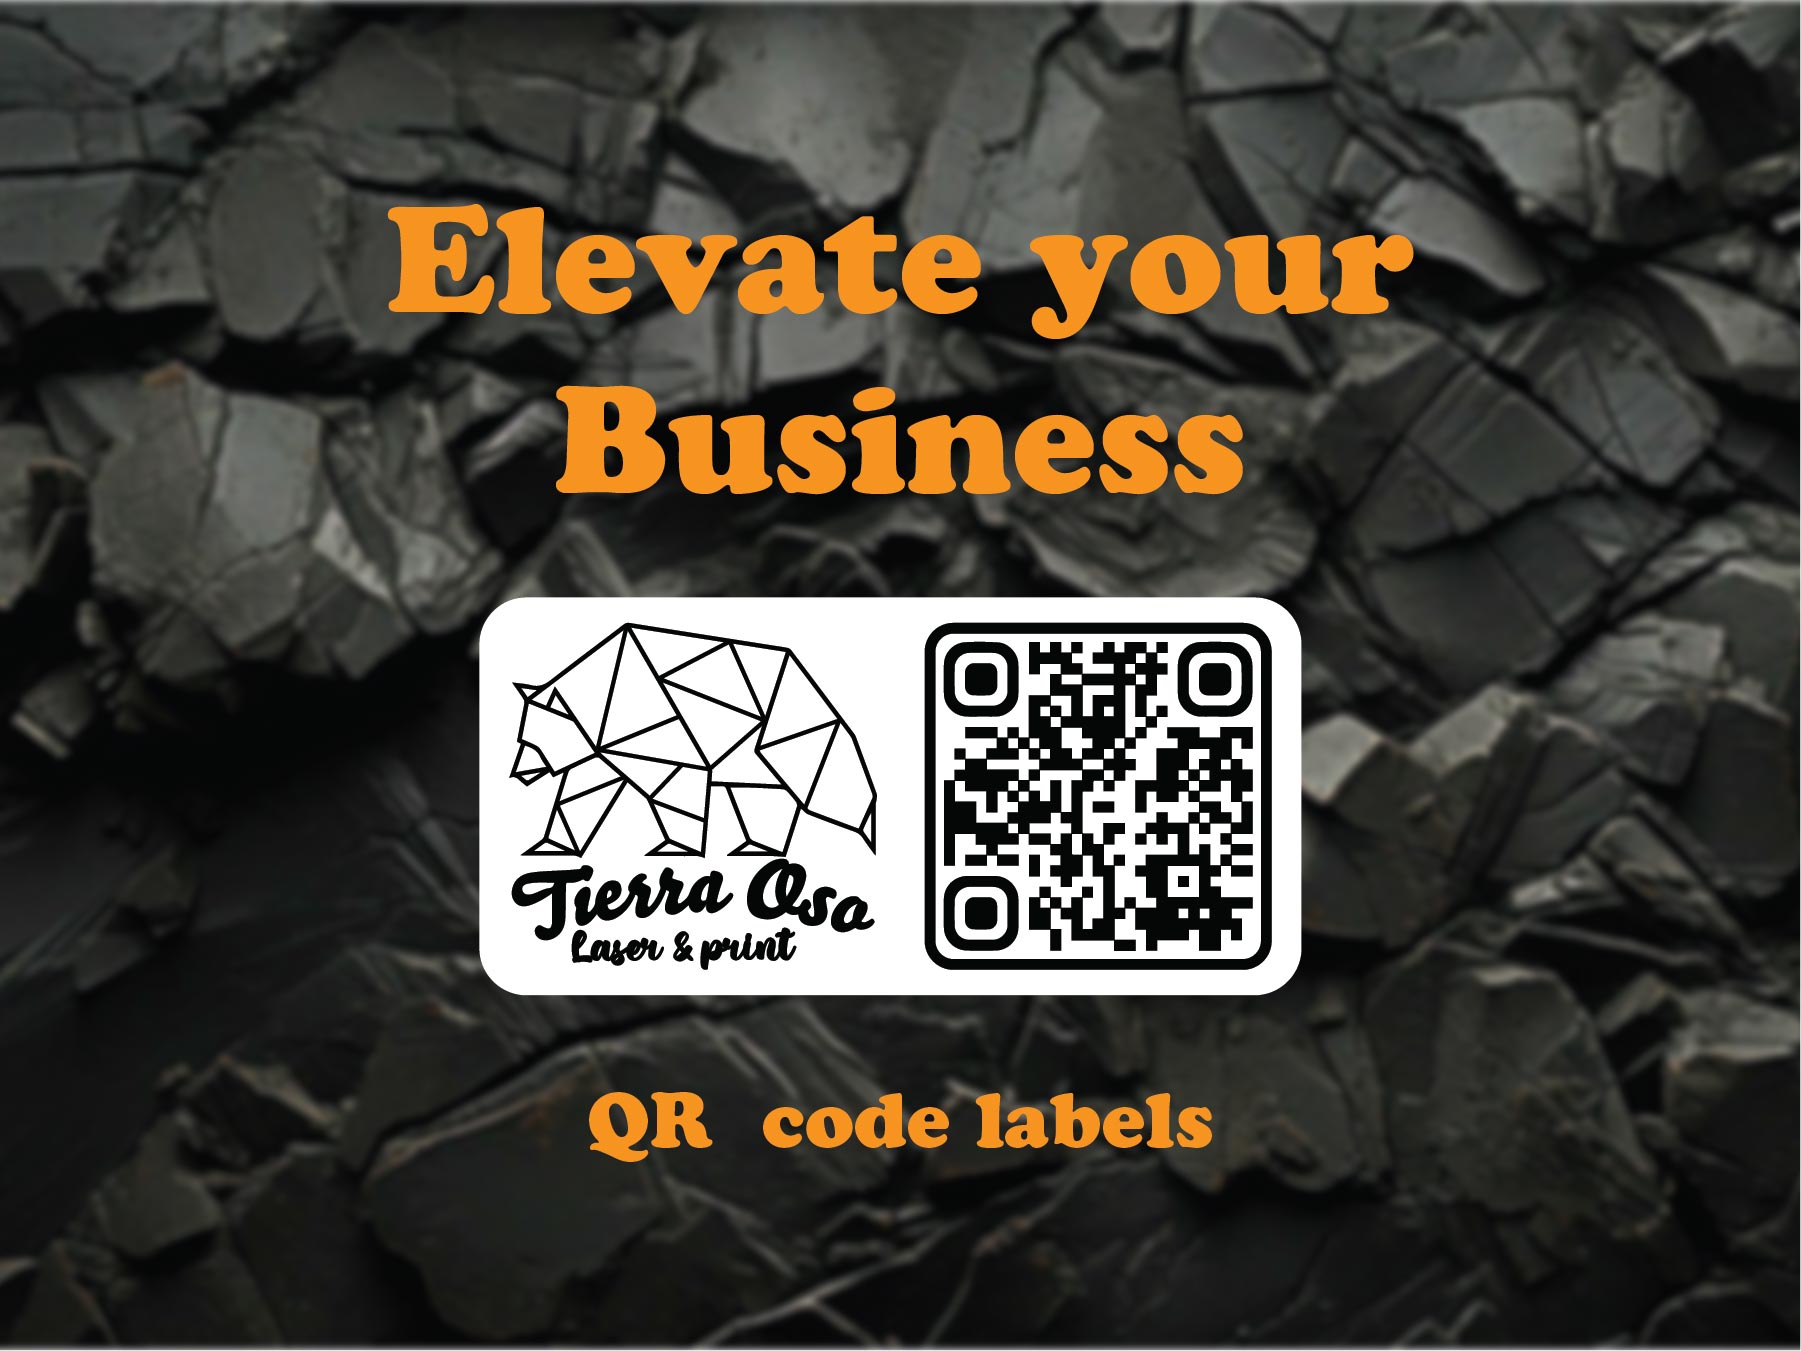 Custom 1''inch by 2" or 3" inch vinyl stickers for businesses logos  and Qr codes 1"x2" 1"x3"